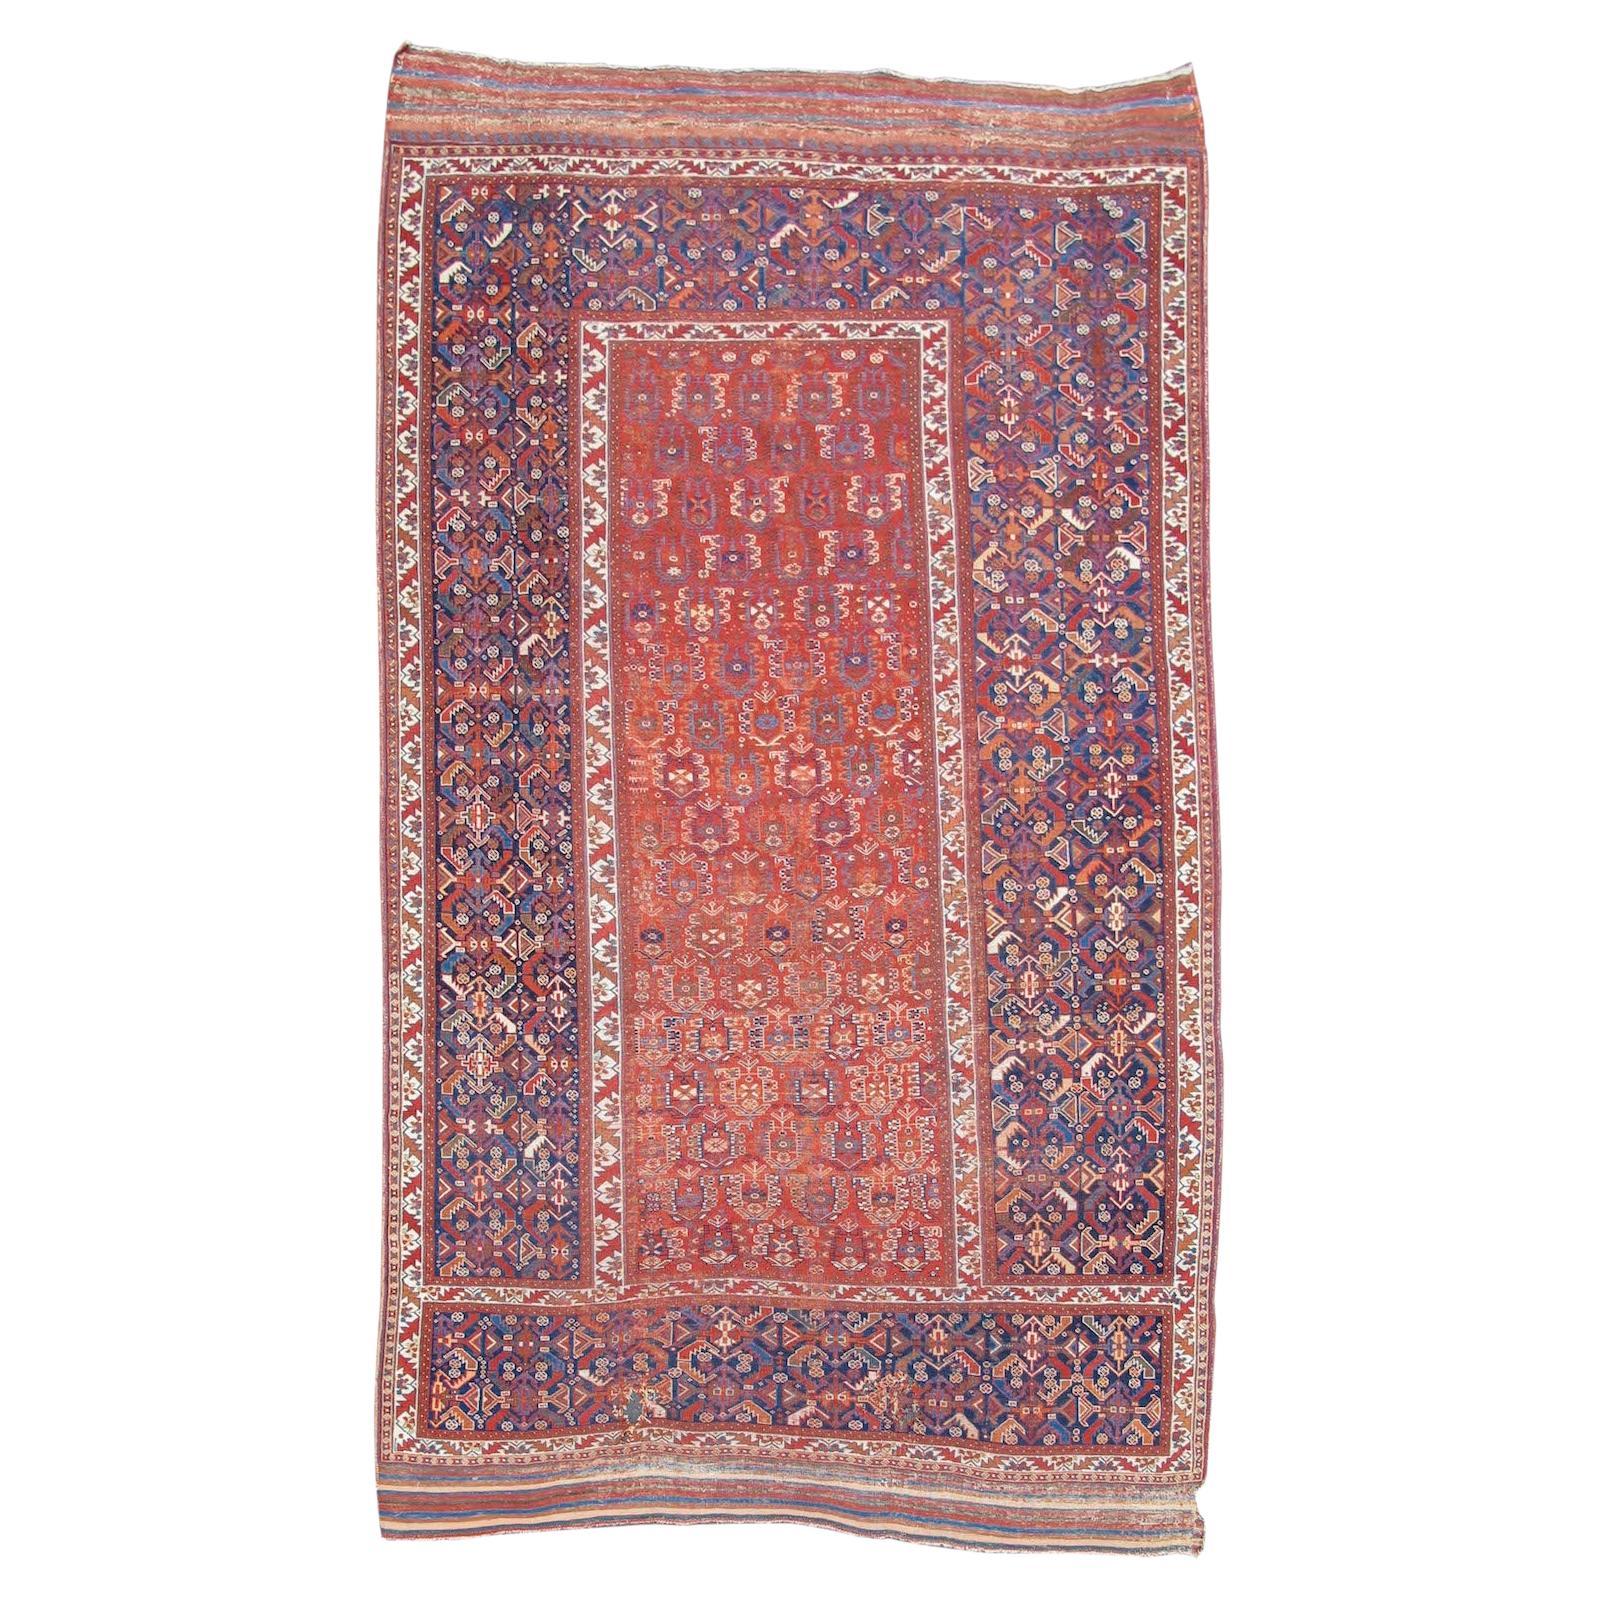 Antique Southwest Persian Afshar Triclinnium Rug, Late 19th Century For Sale